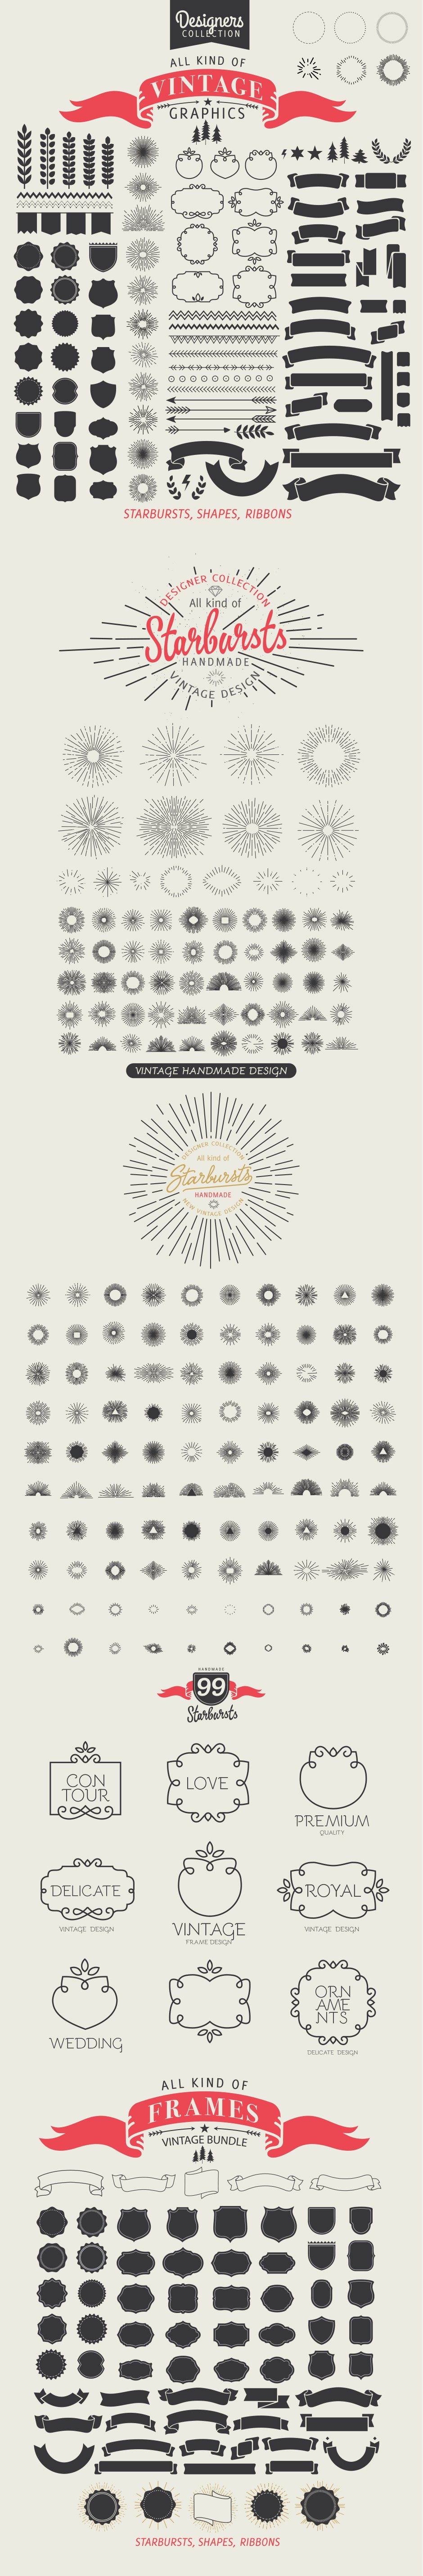 240 Styled Ribbons, Starbursts & Shapes Vector Graphics